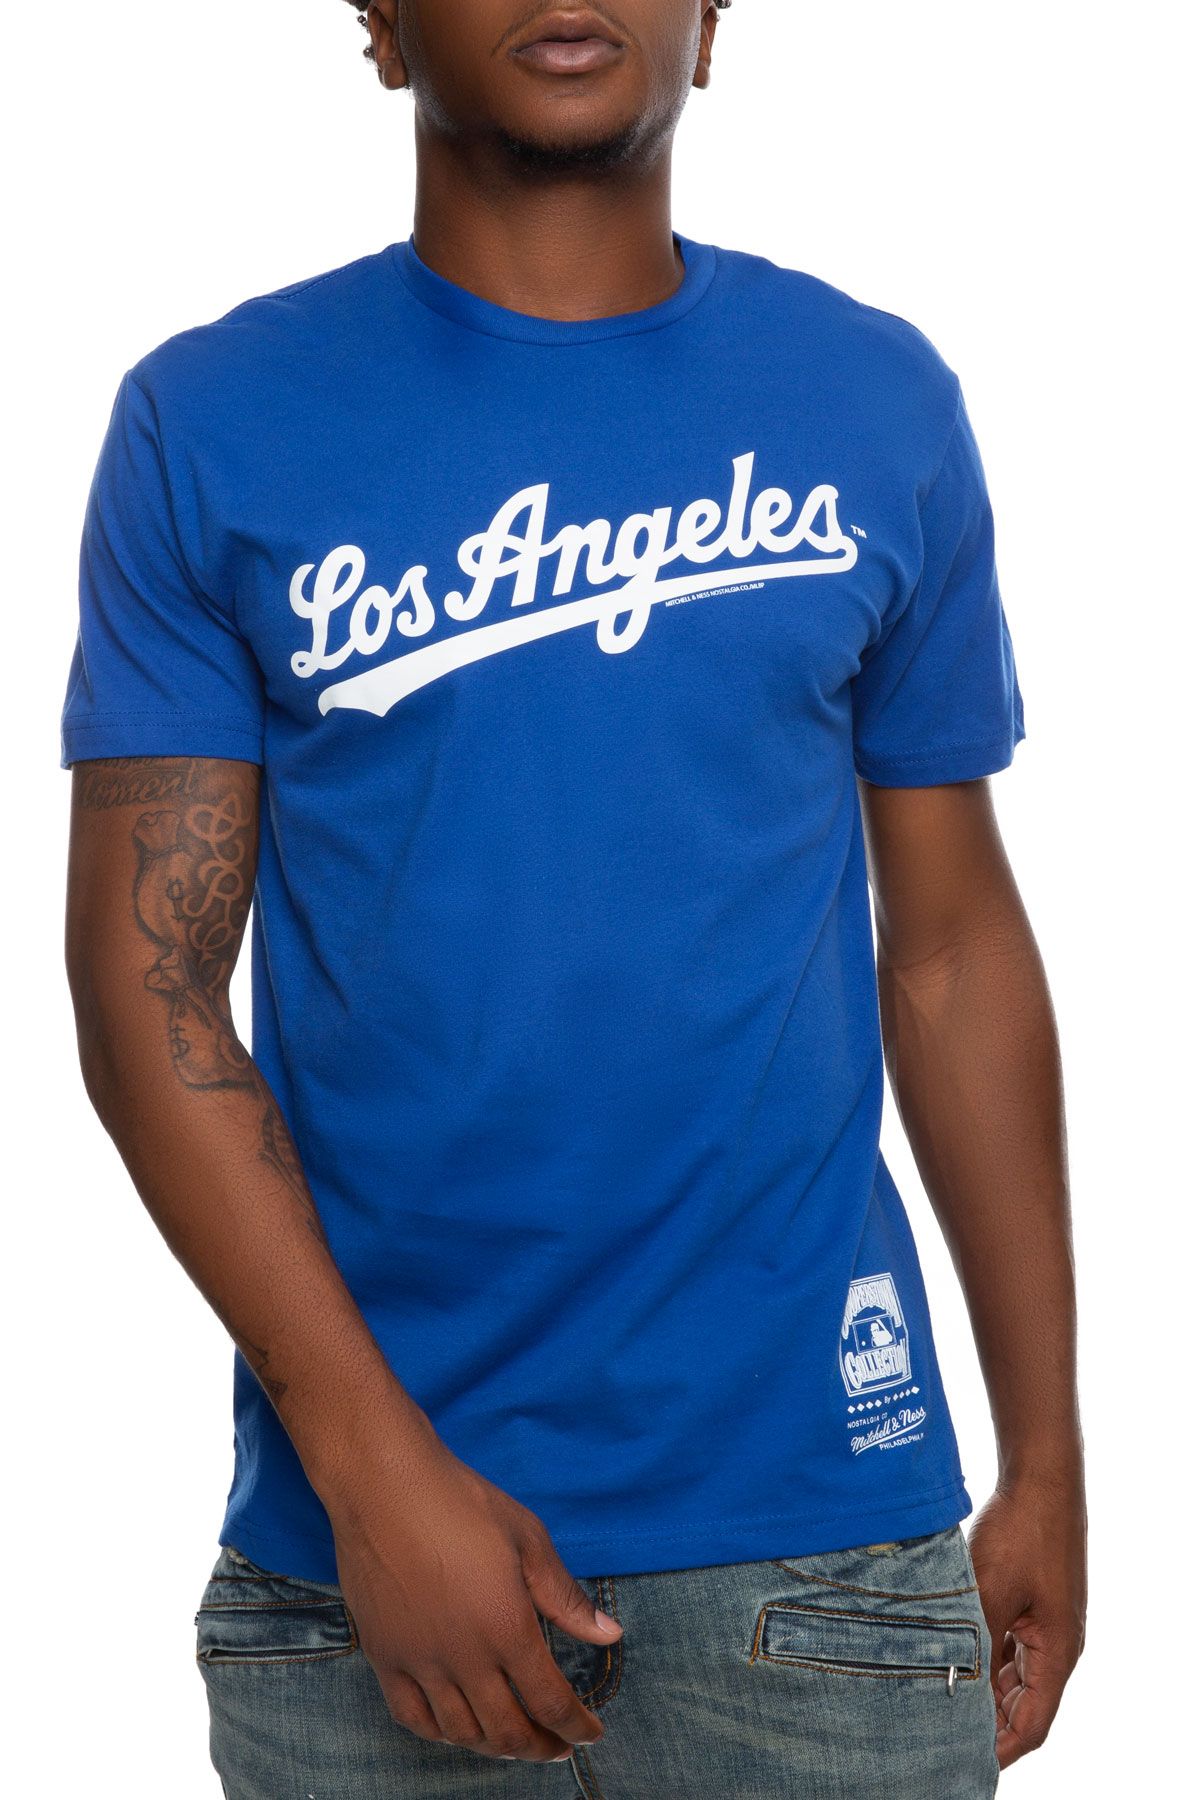 Los Angeles Dodgers Youth Mitchell & Ness Script Cotton Tank Top